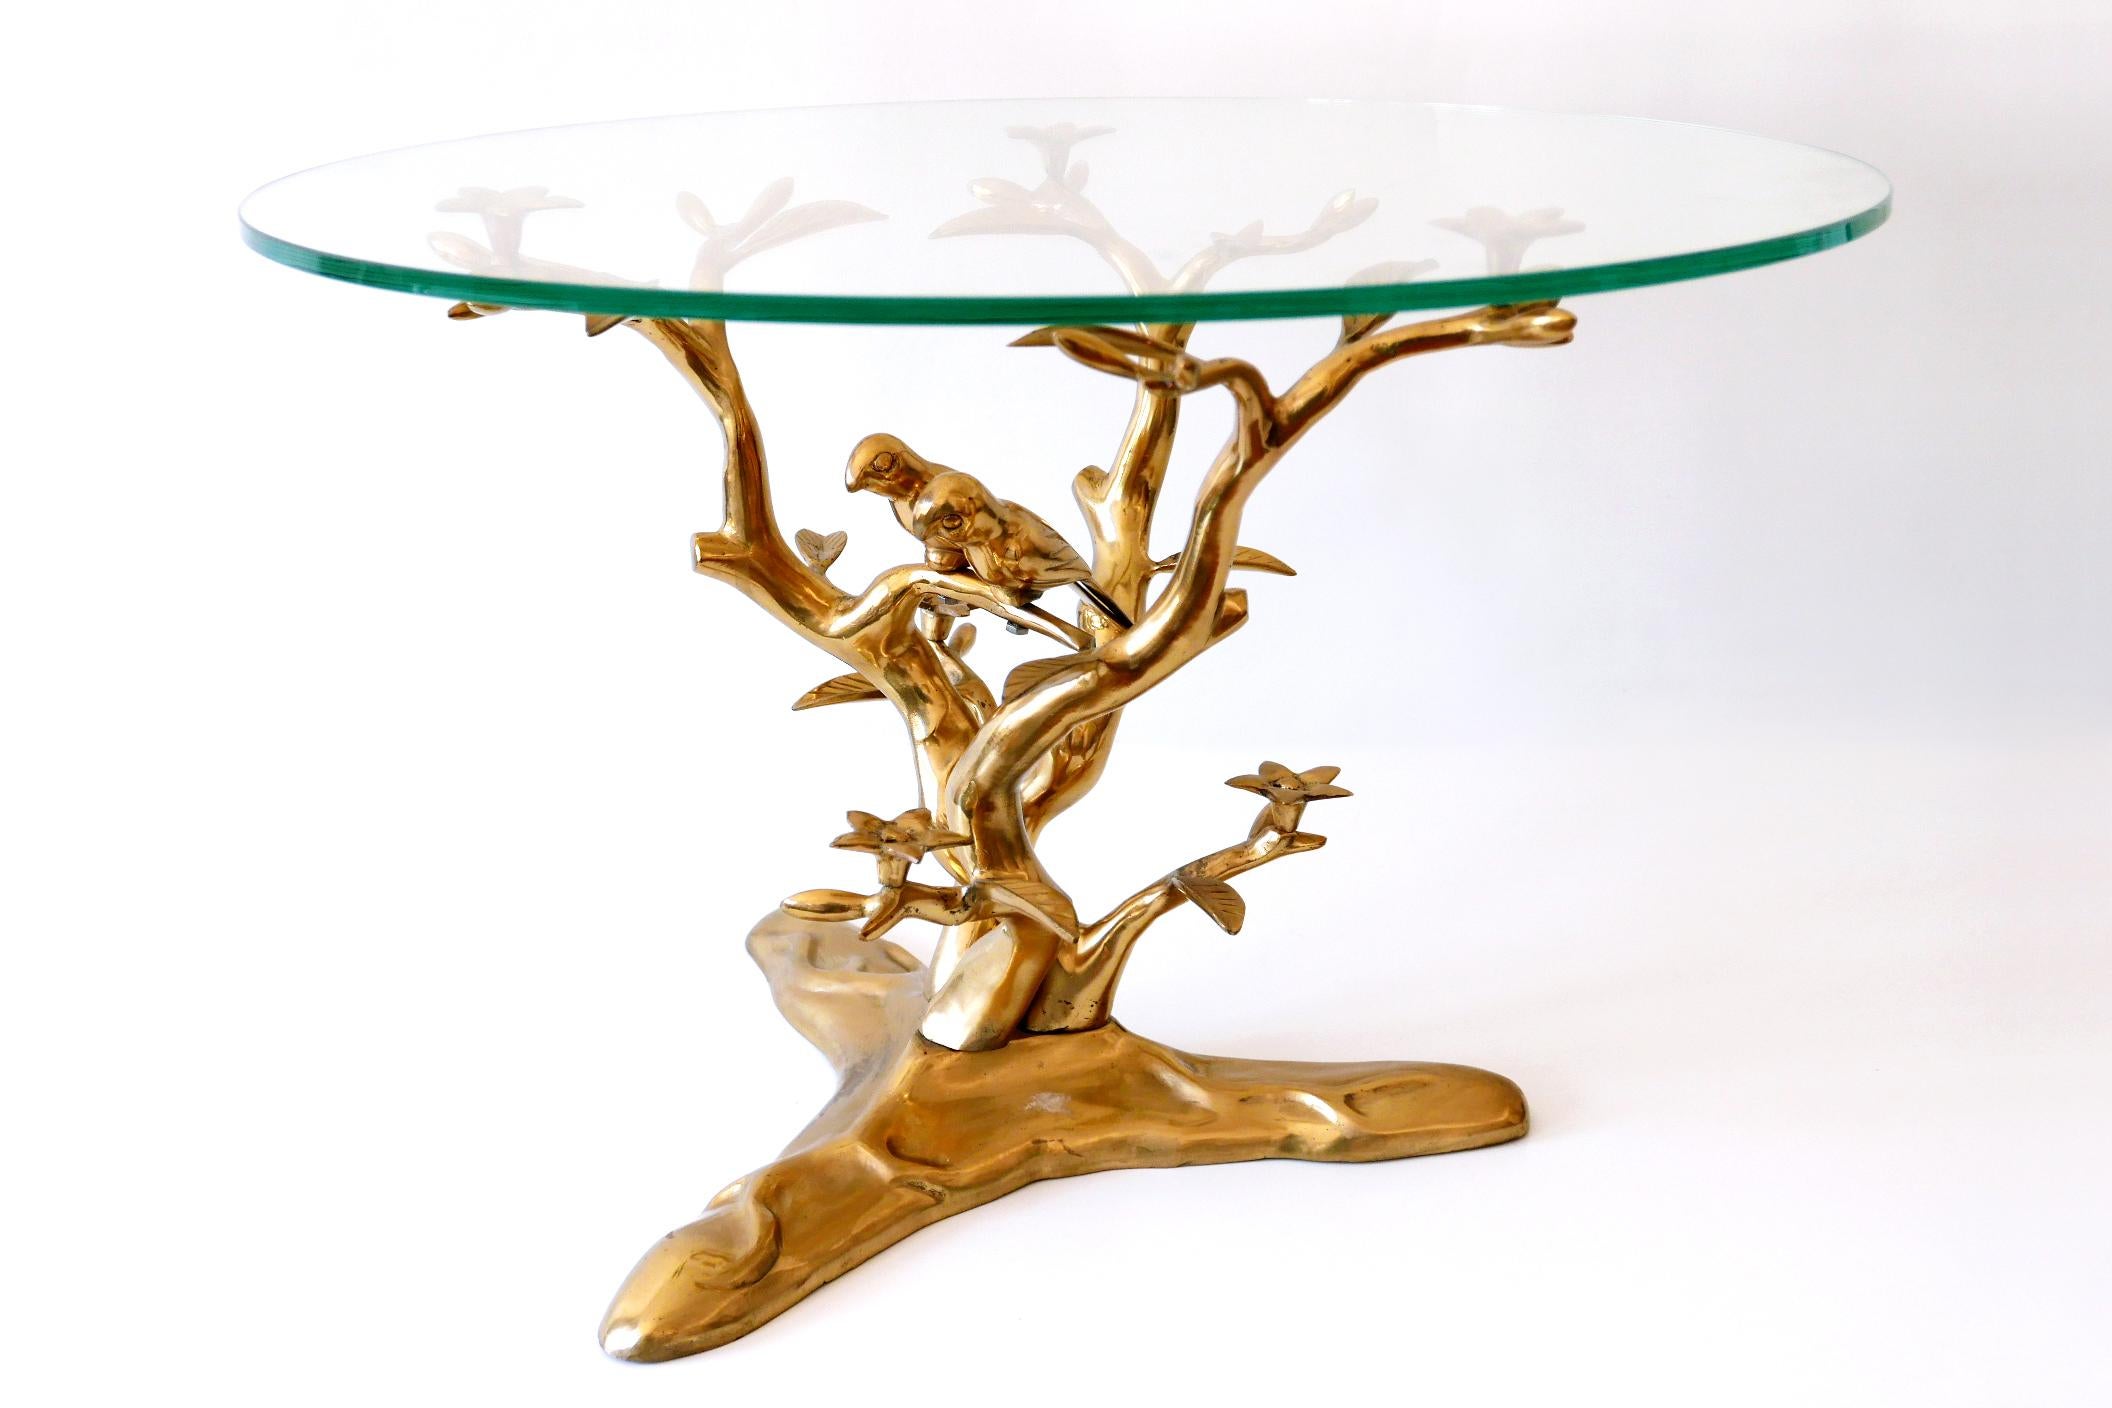 Late 20th Century Sculptural Mid-Century Modern Brass Coffee Table by Willy Daro, Belgium, 1970s